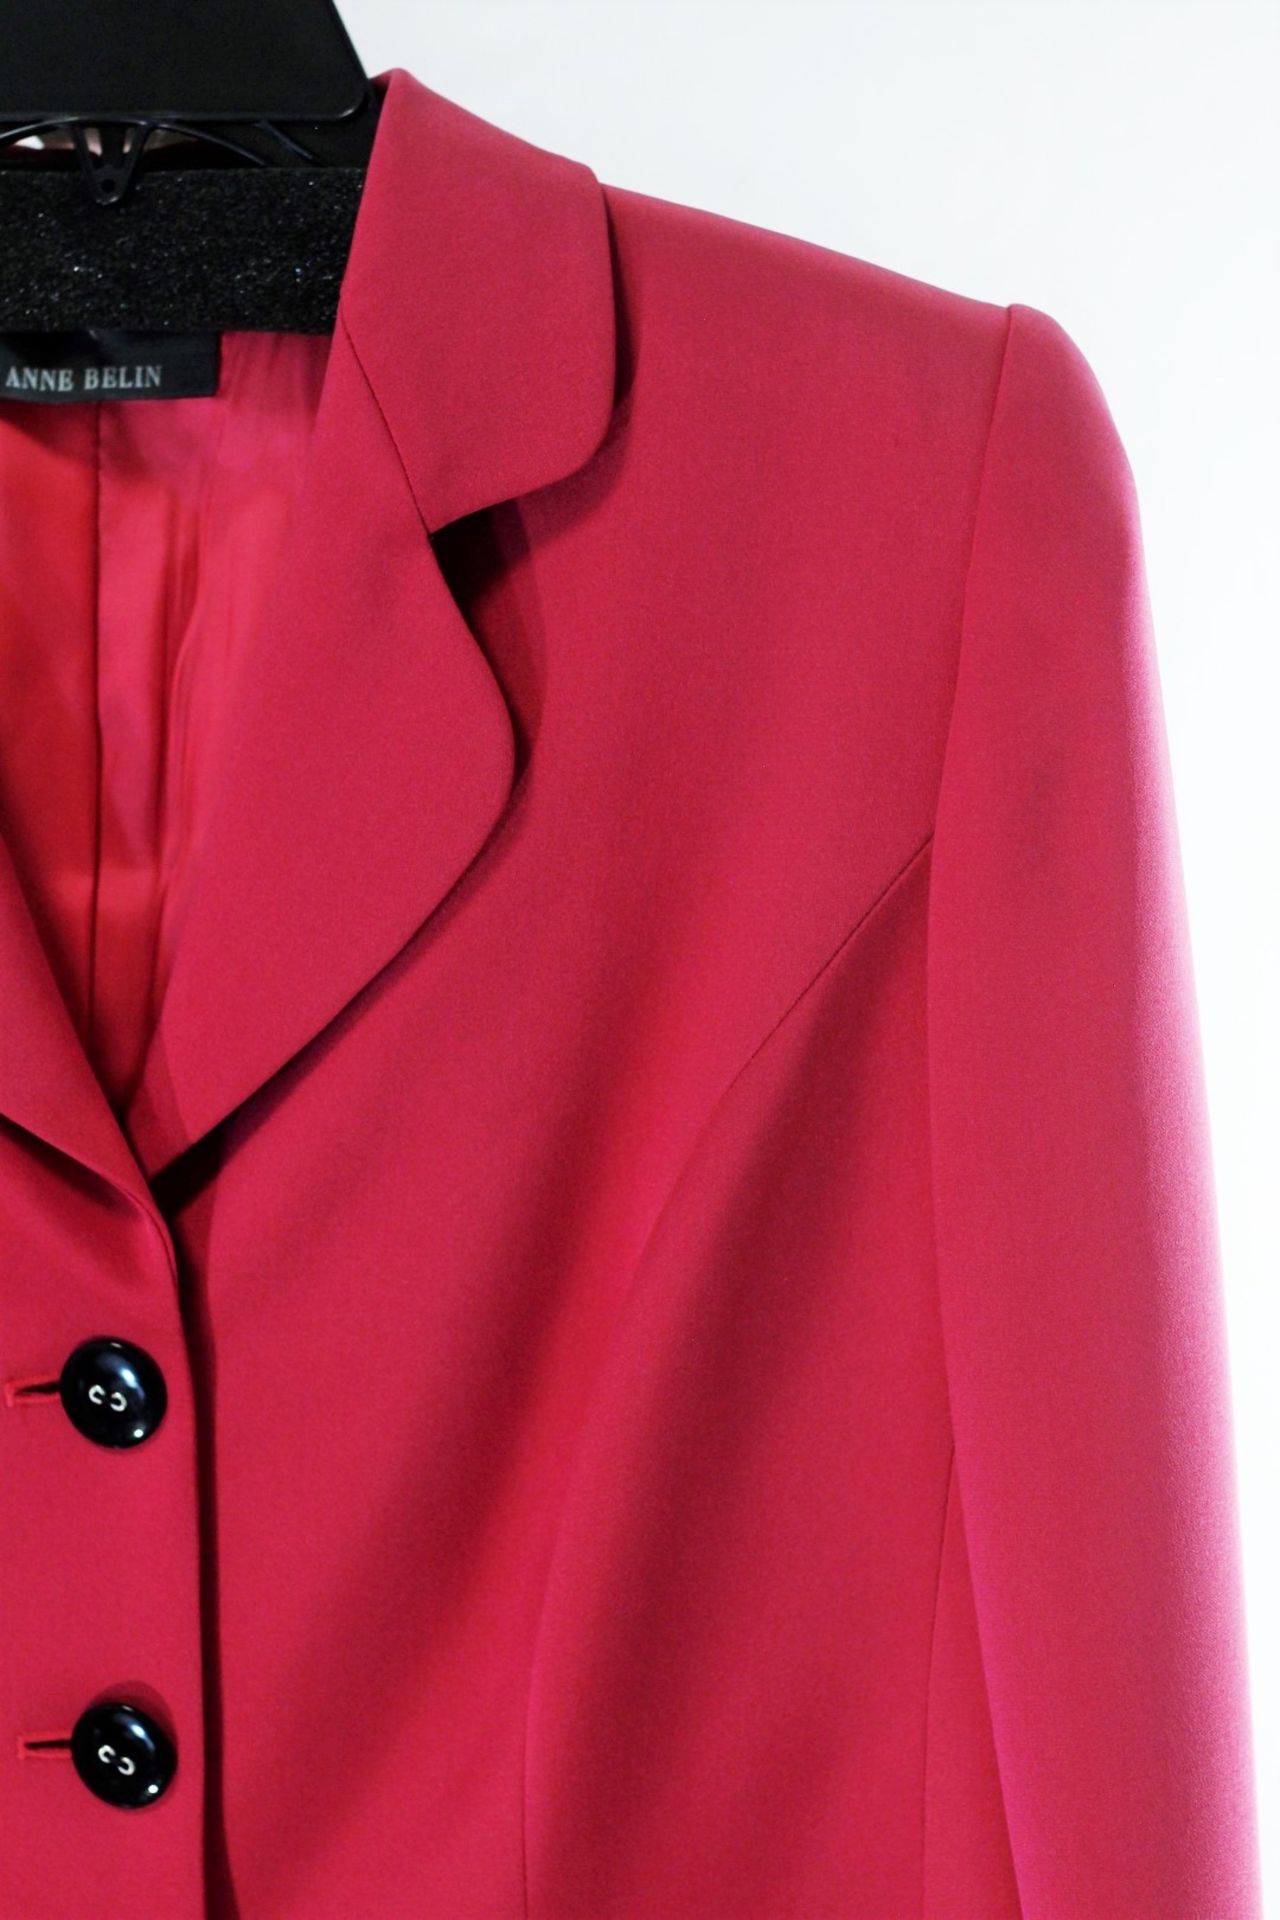 1 x Anne Belin Fuscia Jacket - Size: 18 - Material: 100% Silk - From a High End Clothing Boutique In - Image 2 of 9